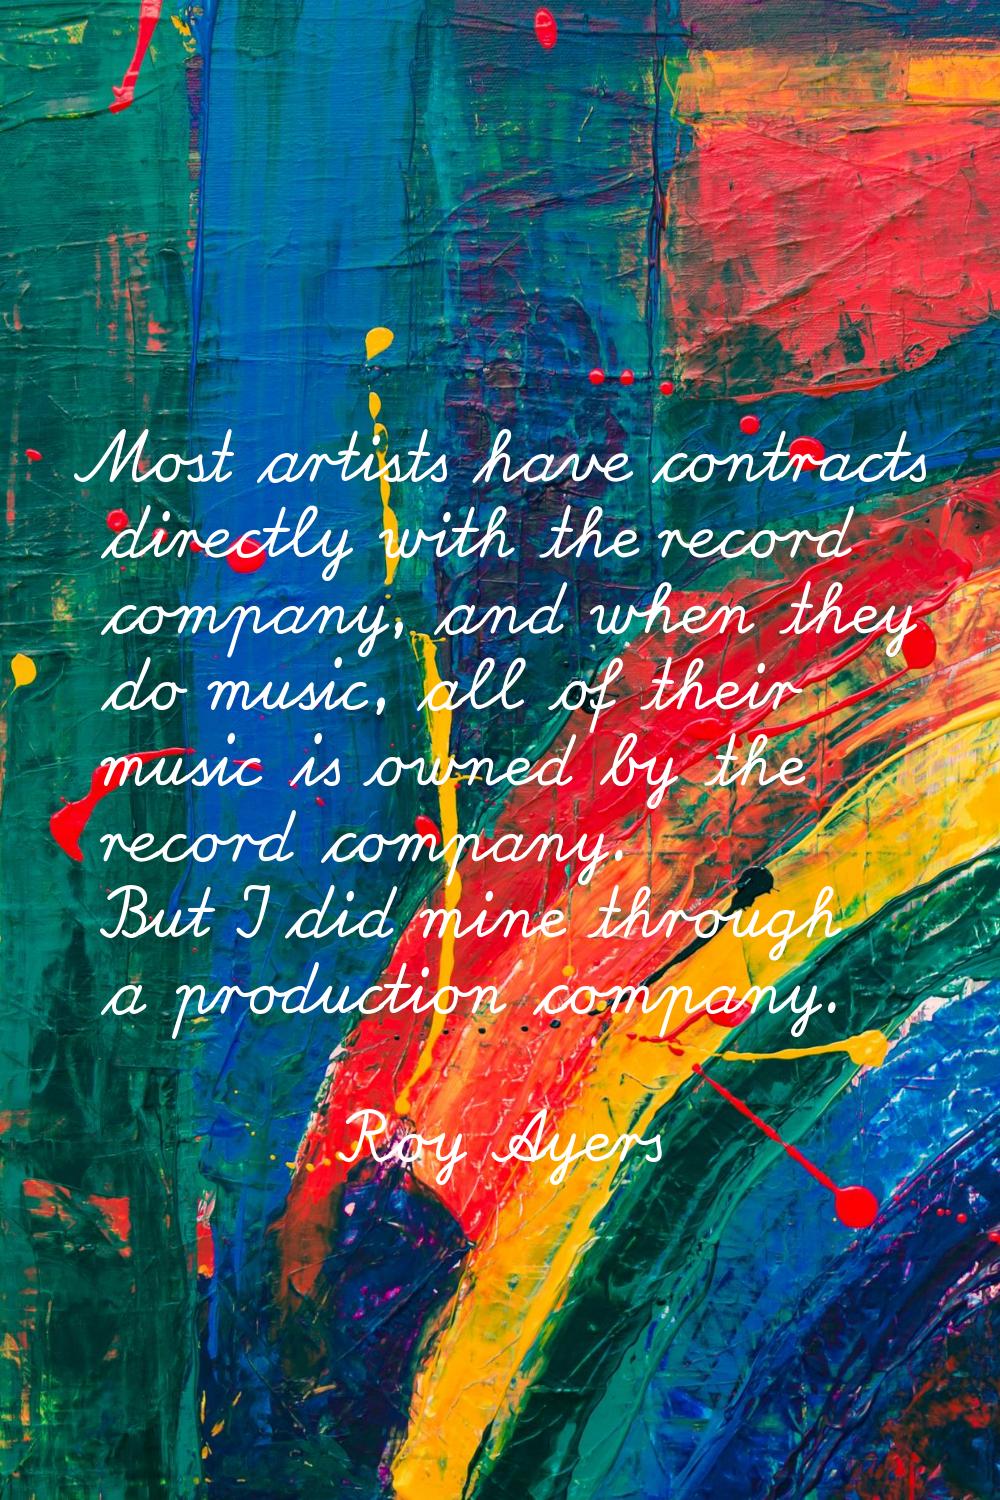 Most artists have contracts directly with the record company, and when they do music, all of their 